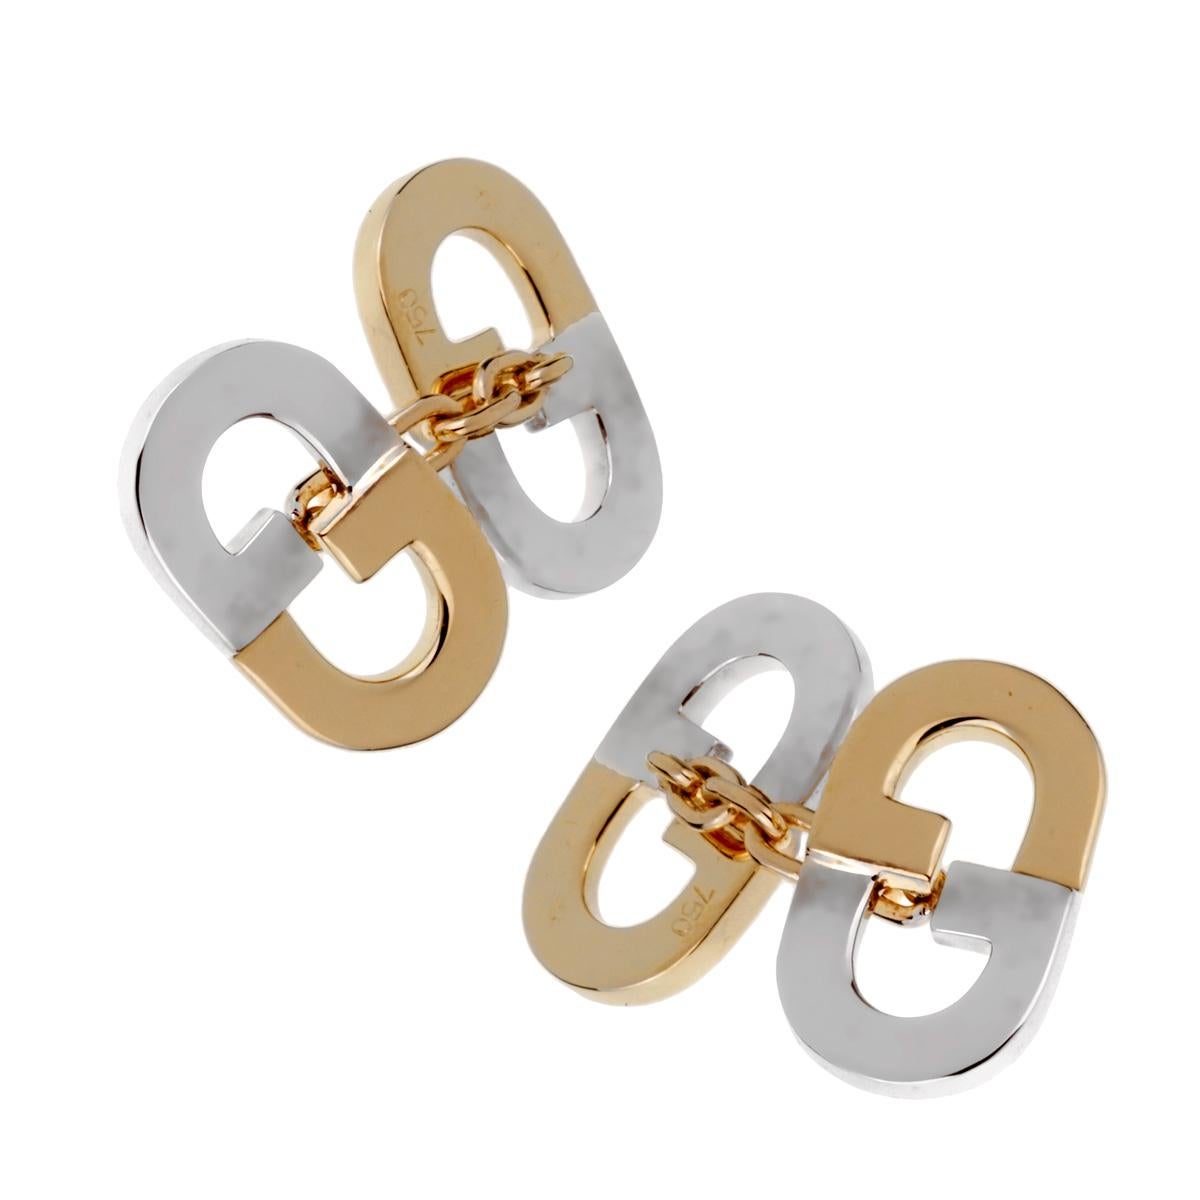 A chic pair of Gucci cufflinks in 18k white and yellow gold featuring the iconic GG motif.